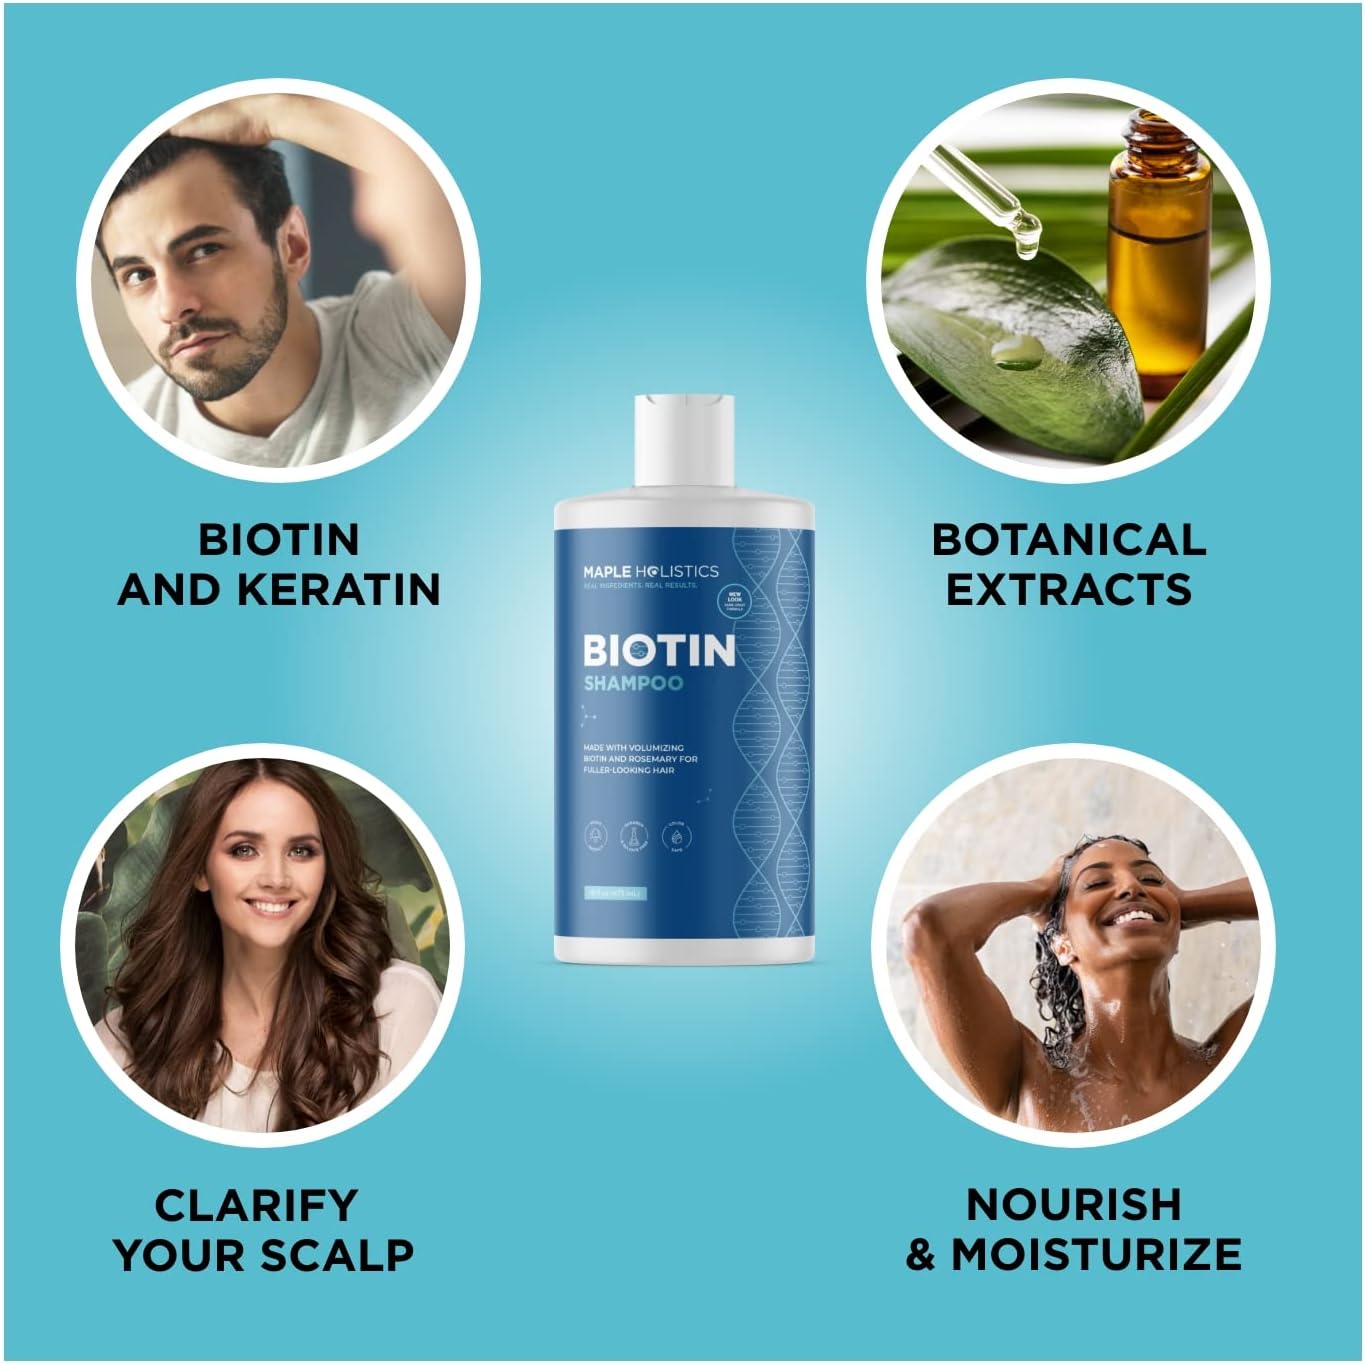 Shampoo for Thinning Hair and Hair Loss - Volumizing Biotin Shampoo for Hair Growth with Rosemary Argan Oil and Evening Primrose Oil - Sulfate Free Anti Dandruff Shampoo for Itchy Scalp and Hair Care